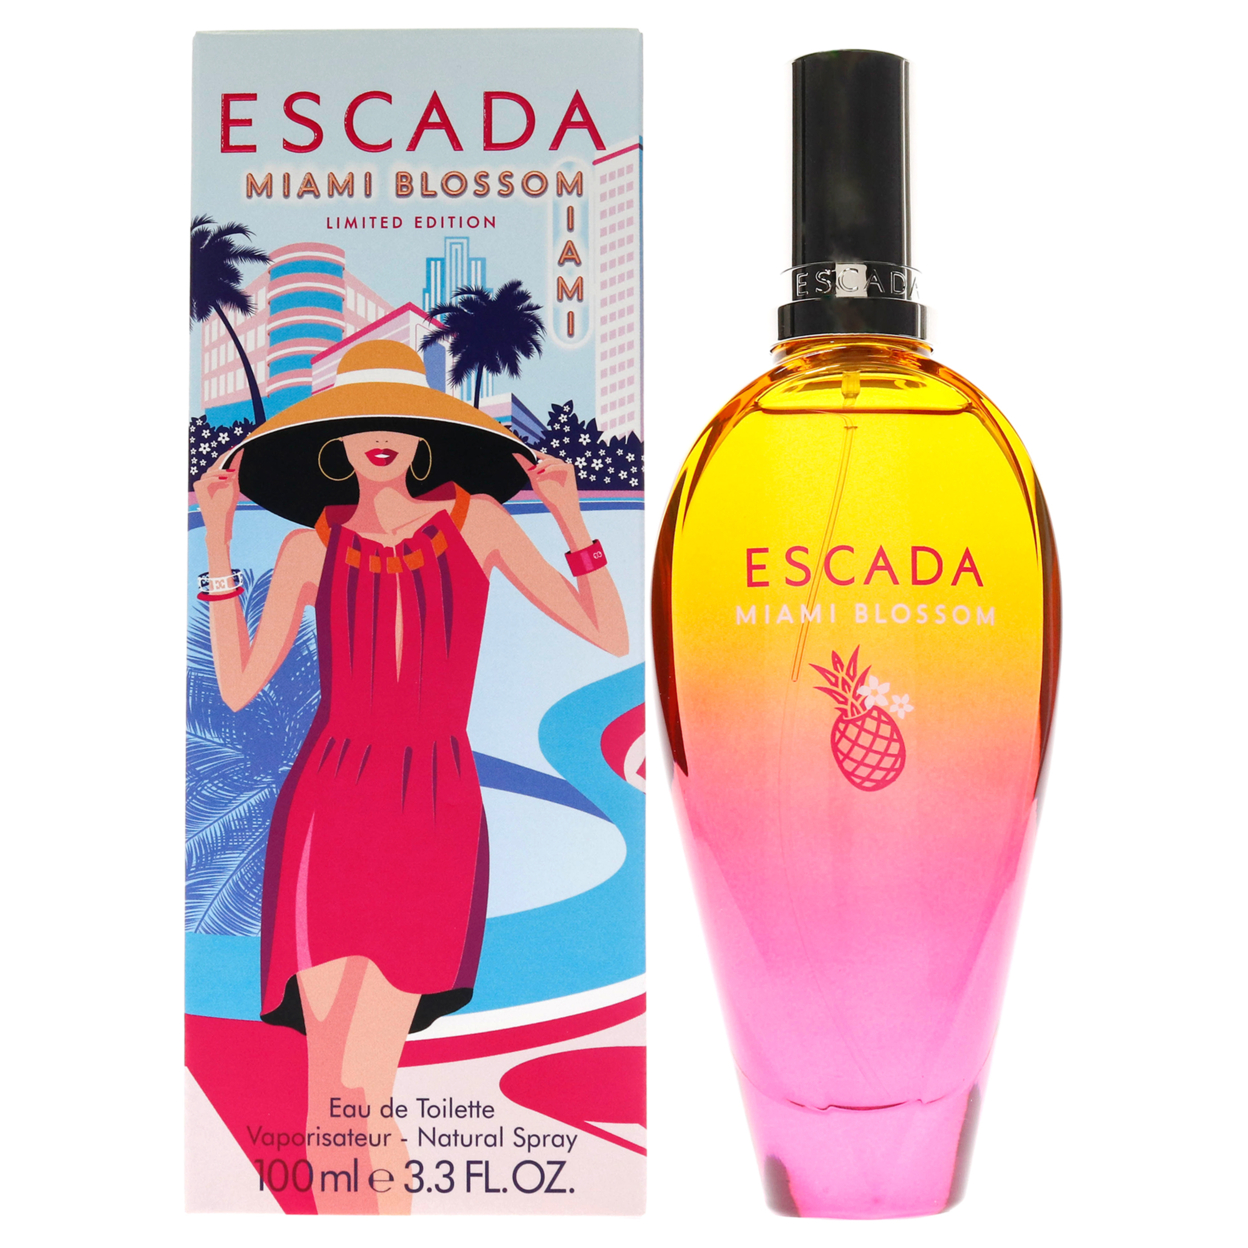 Miami Blossom by Escada for Women - 3.3 oz EDT Spray (Limited Edition) - image 1 of 6